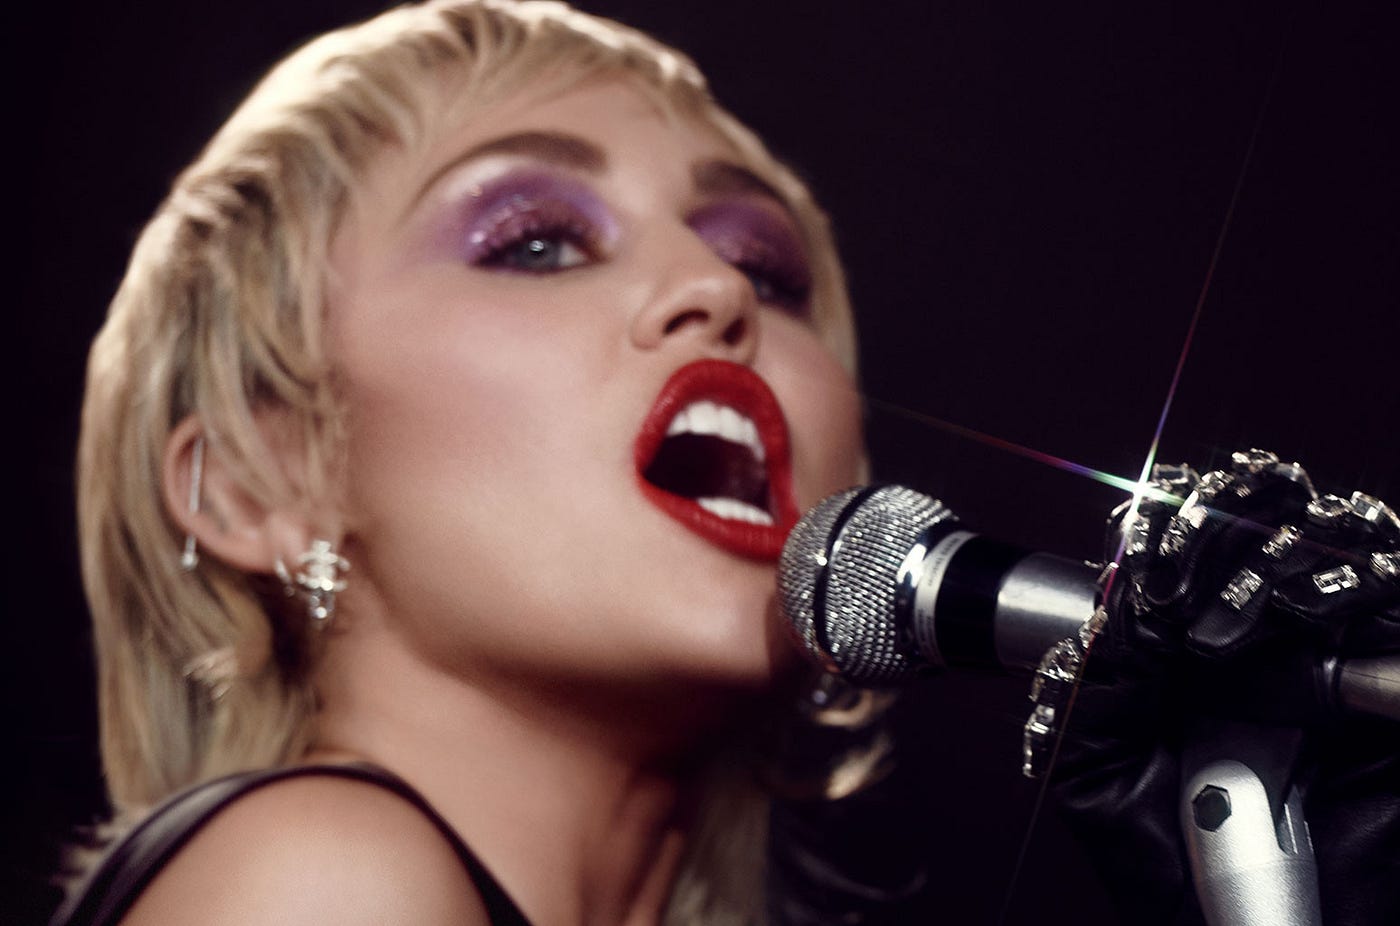 Miley Cyrus Finds Home on “Plastic Hearts”, by Coleman Spilde